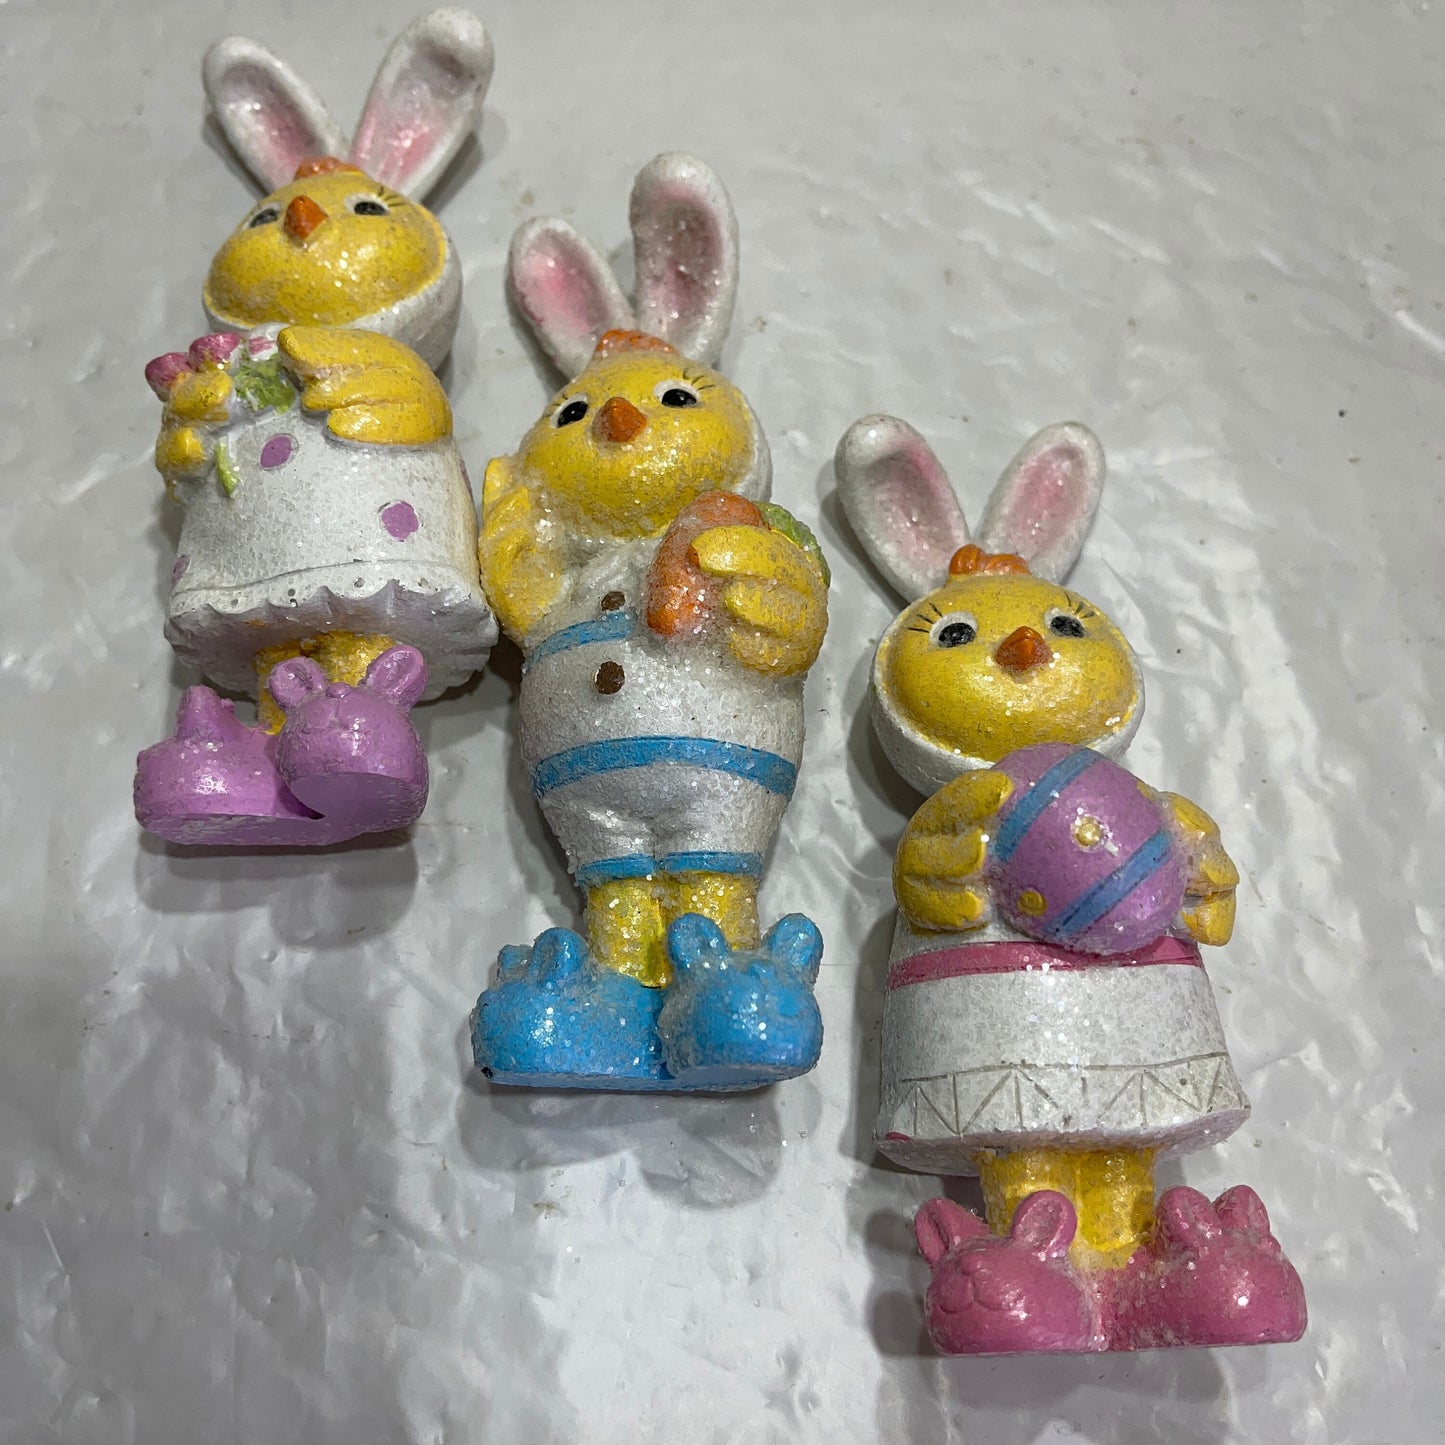 Spectacular Set Of 3 Sparkling Baby Chicks In Bunny Pajamas and Slippers Ready For The Easter Bunny To Visit Vintage Collectible Figurines